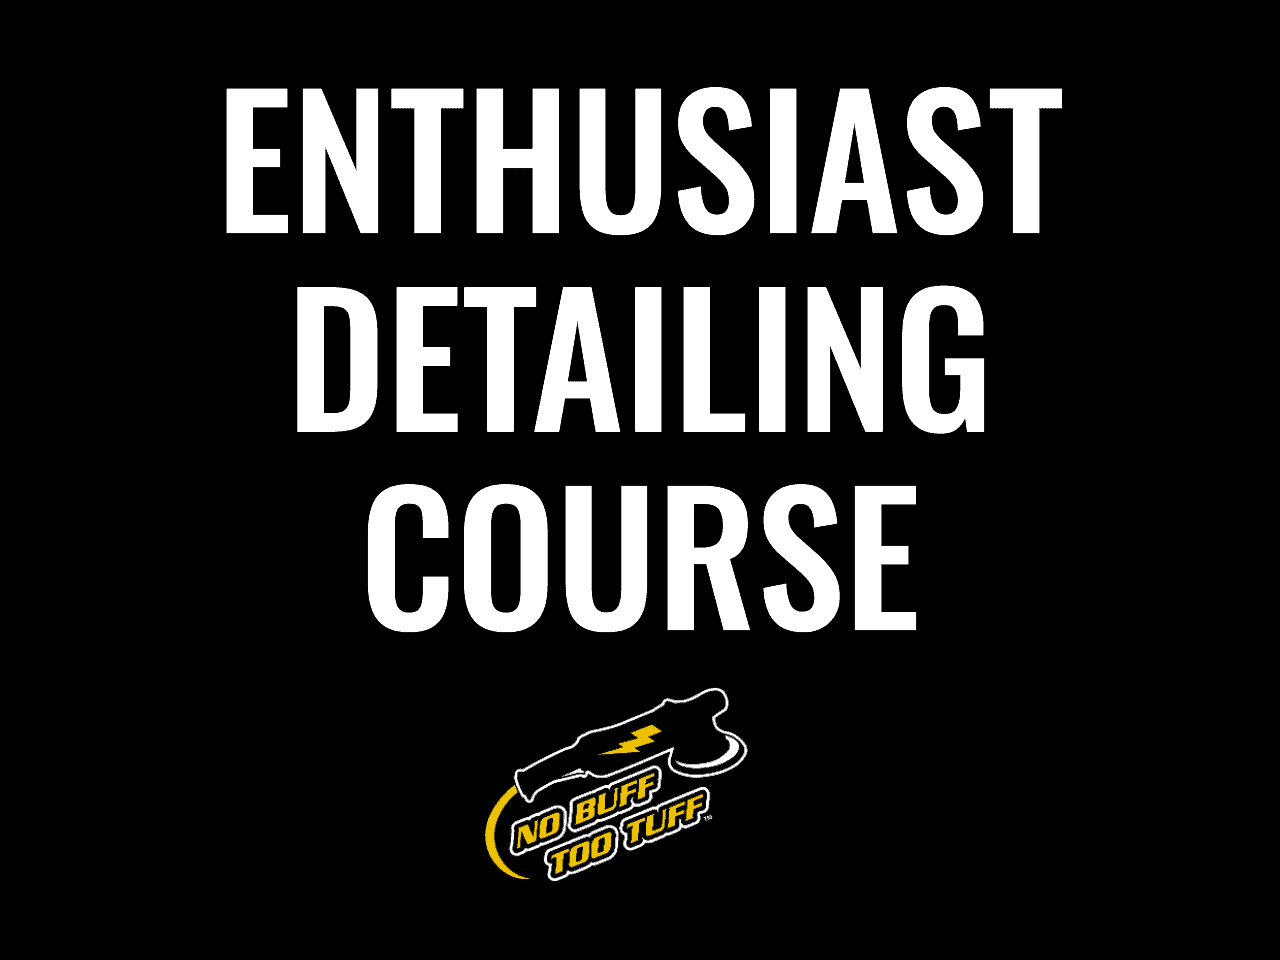 create a professional cover for a course called enthusiast detailing by no buff too tuff deta